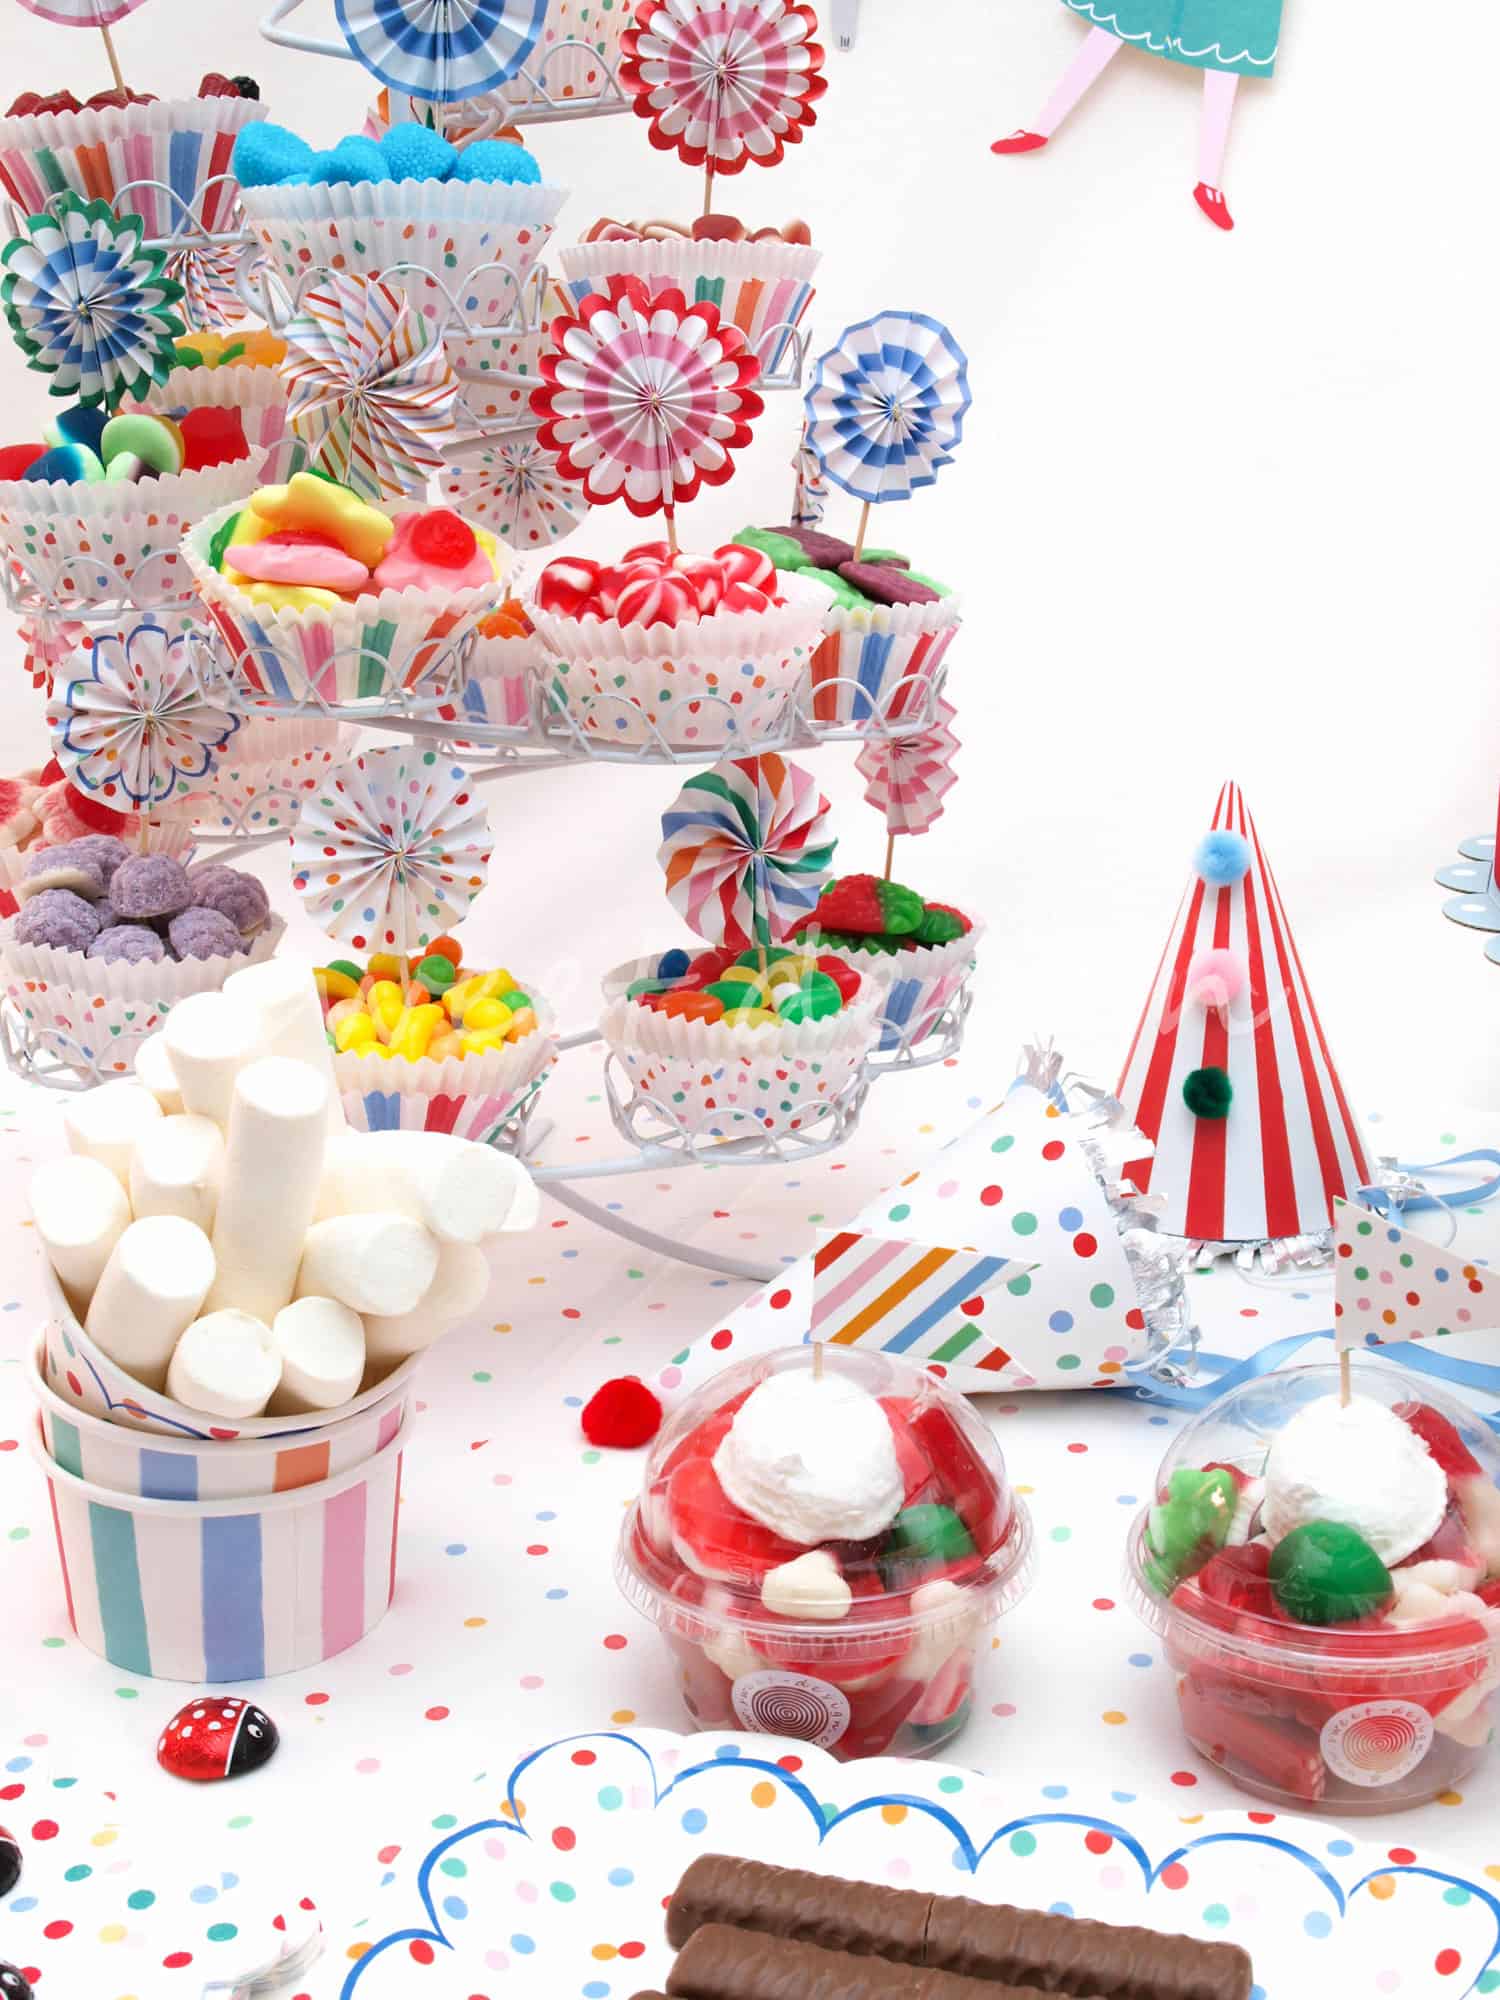 Sweet Party (Mesa dulce con Expositor)